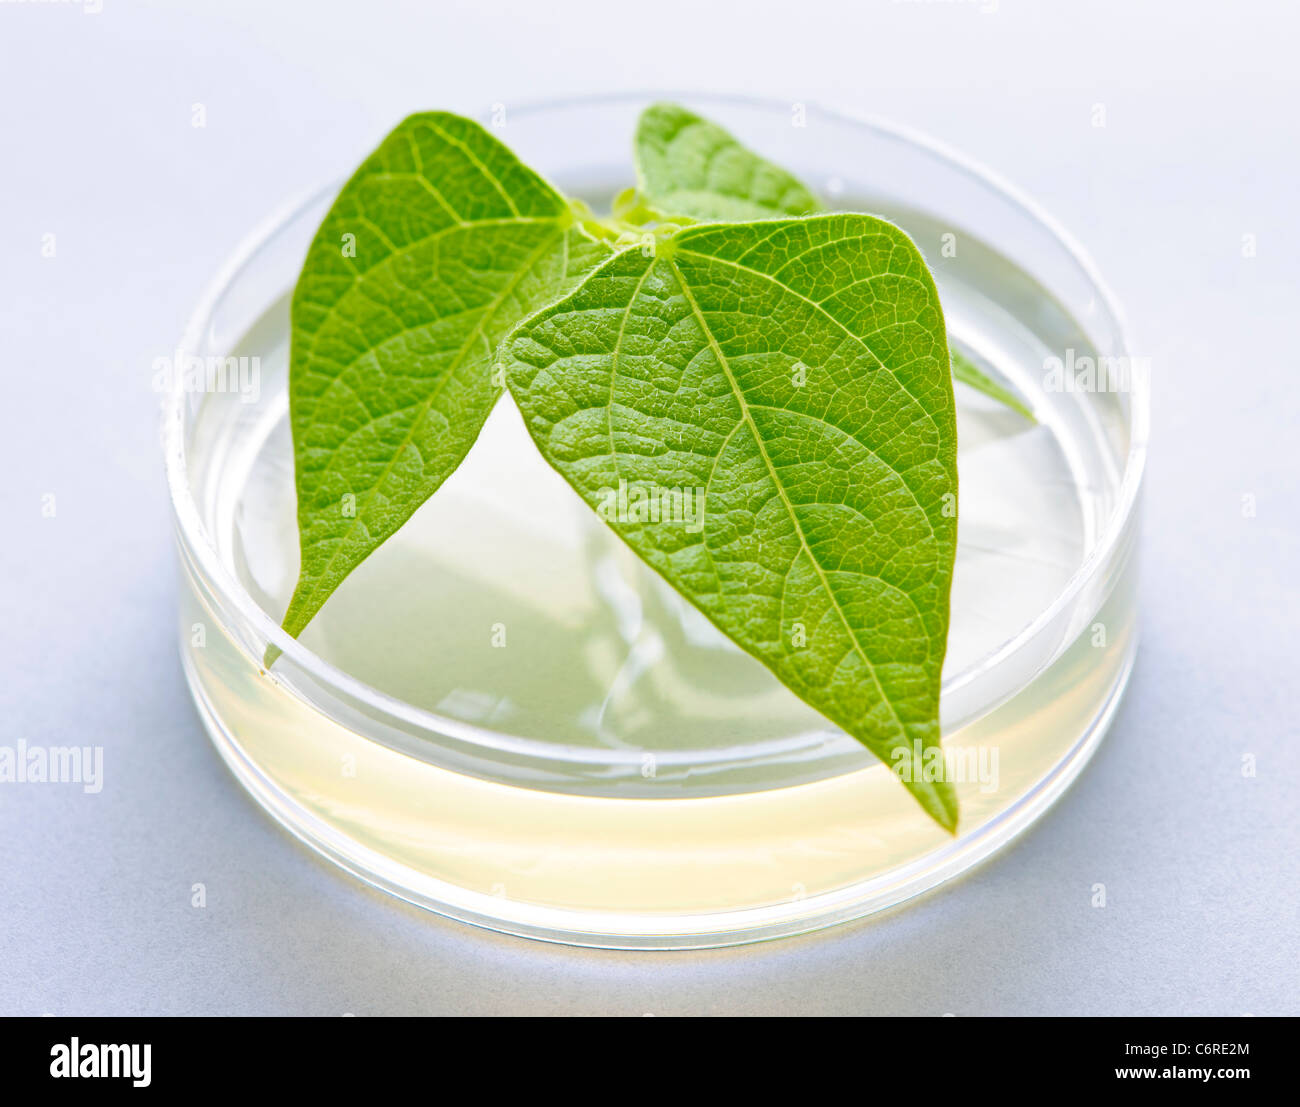 Genetically modified plant tested in petri dish Stock Photo